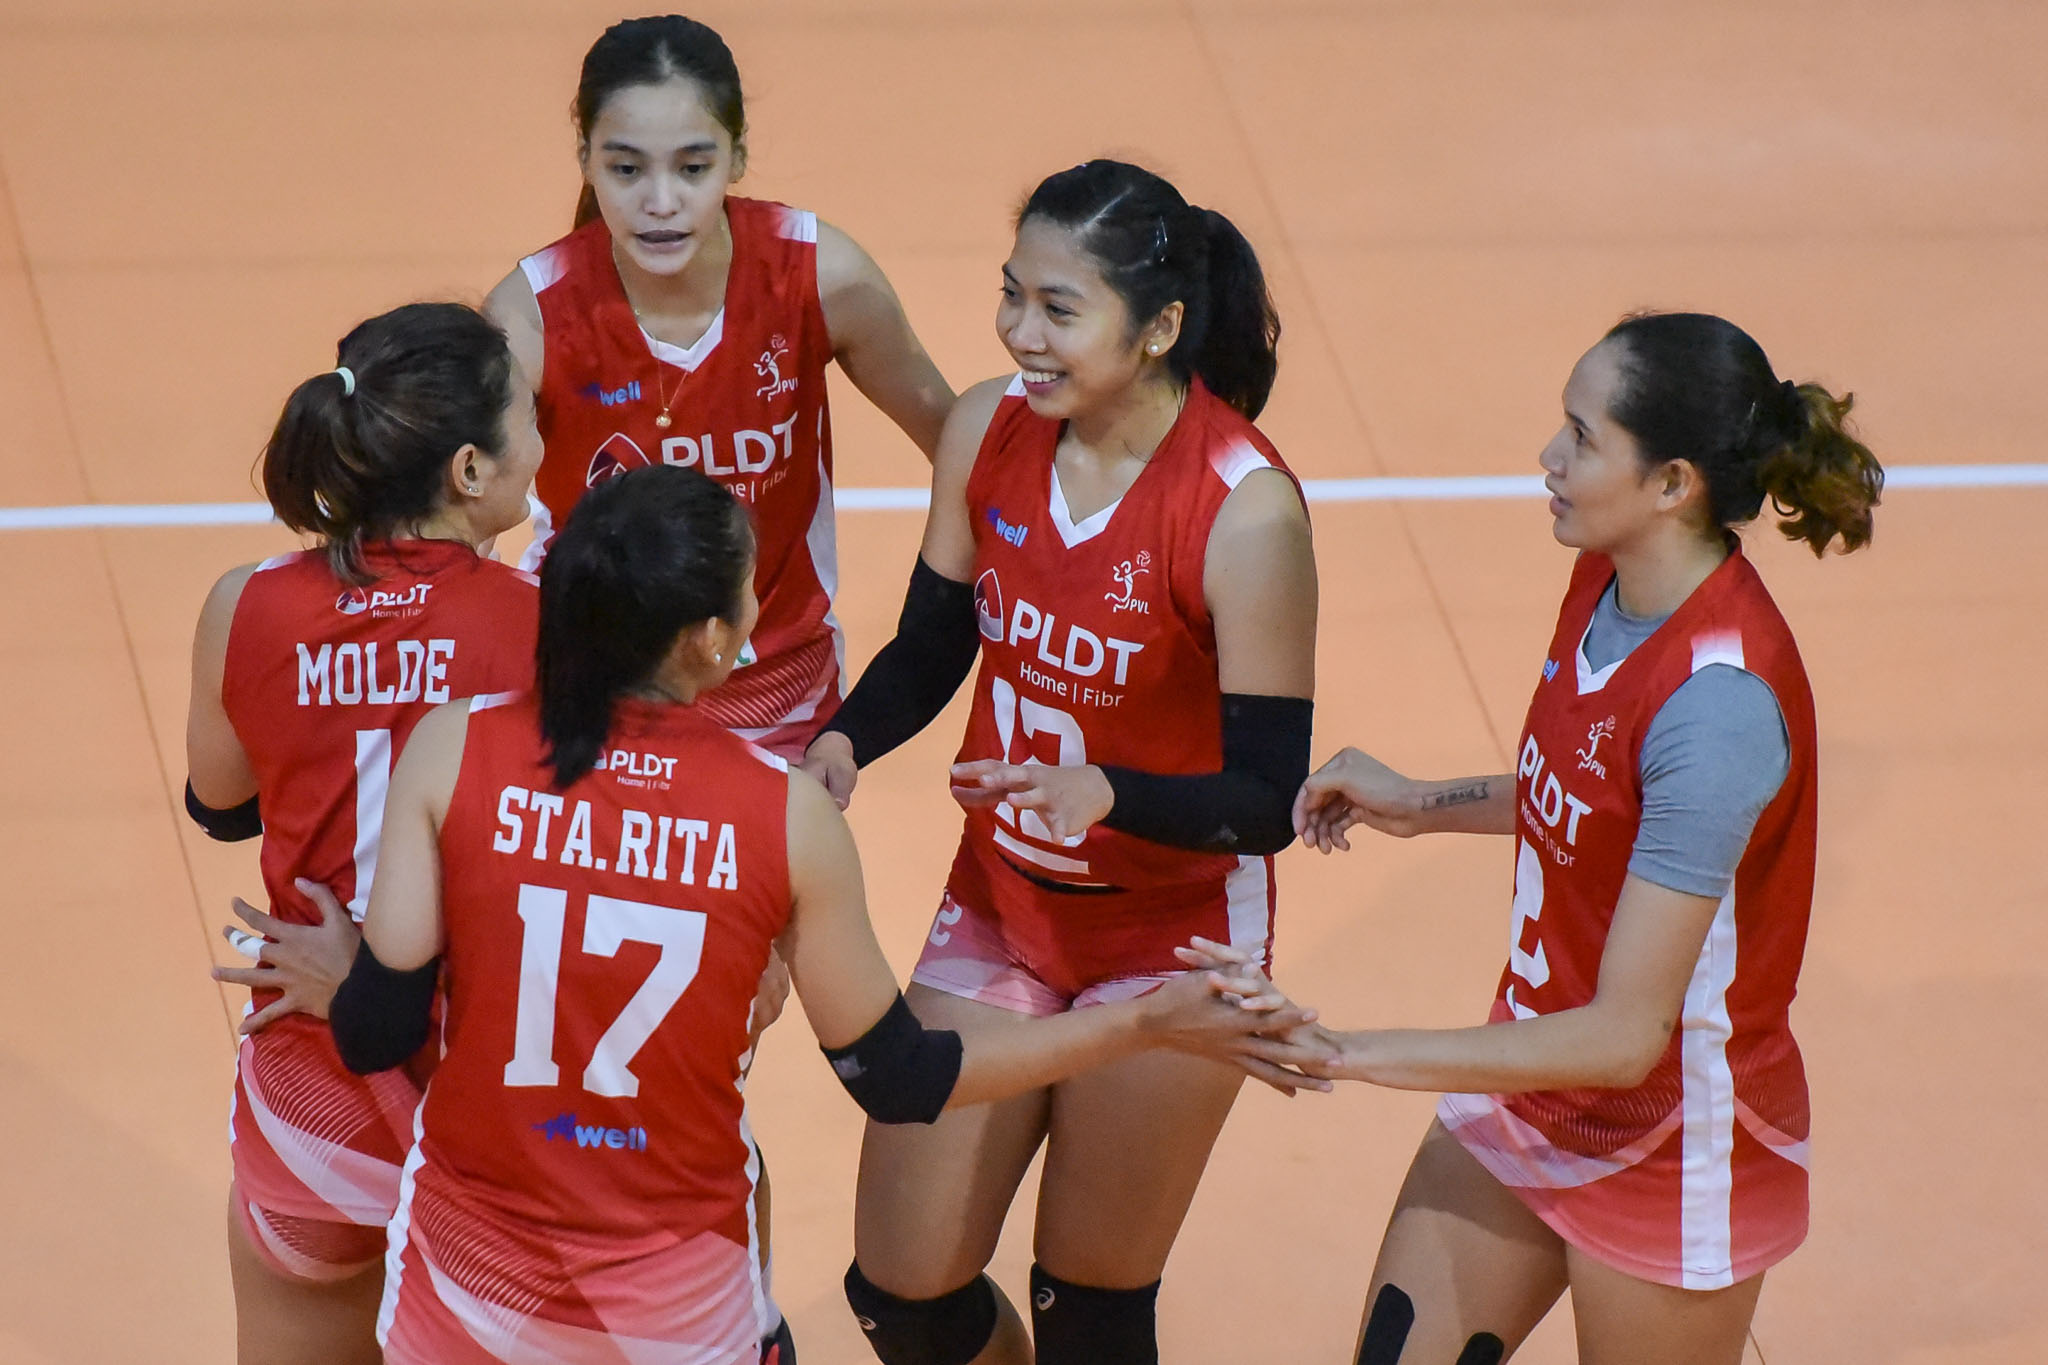 2021-PVL-Open-PLDT-vs.-Cignal-Rhea-Dimaculangan-0272 Dimaculangan trusting the PLDT process after ending PVL Open on a high News PVL Volleyball  - philippine sports news